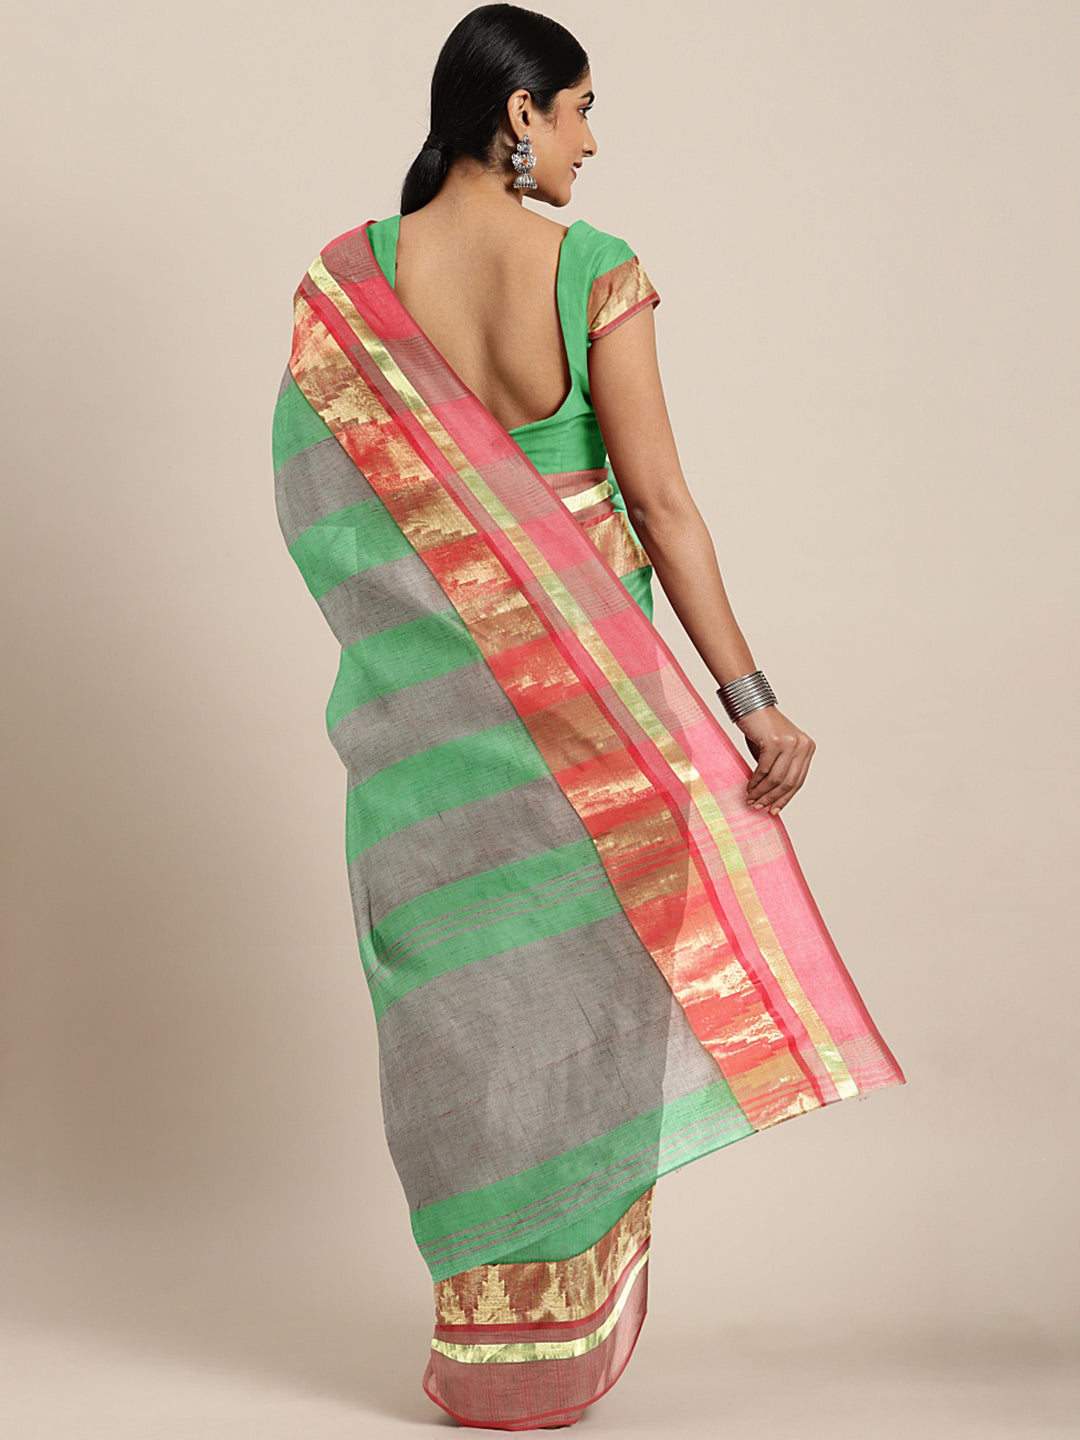 Green Tant Woven Design Saree Without Blouse Piece DUTASA042 DUTASA042-Saree-Kalakari India-DUTASA042-Geographical Indication, Hand Crafted, Heritage Prints, Natural Dyes, Sarees, Silk Cotton, Sustainable Fabrics, Taant, Tant, West Bengal, Woven-[Linen,Ethnic,wear,Fashionista,Handloom,Handicraft,Indigo,blockprint,block,print,Cotton,Chanderi,Blue, latest,classy,party,bollywood,trendy,summer,style,traditional,formal,elegant,unique,style,hand,block,print, dabu,booti,gift,present,glamorous,affordabl